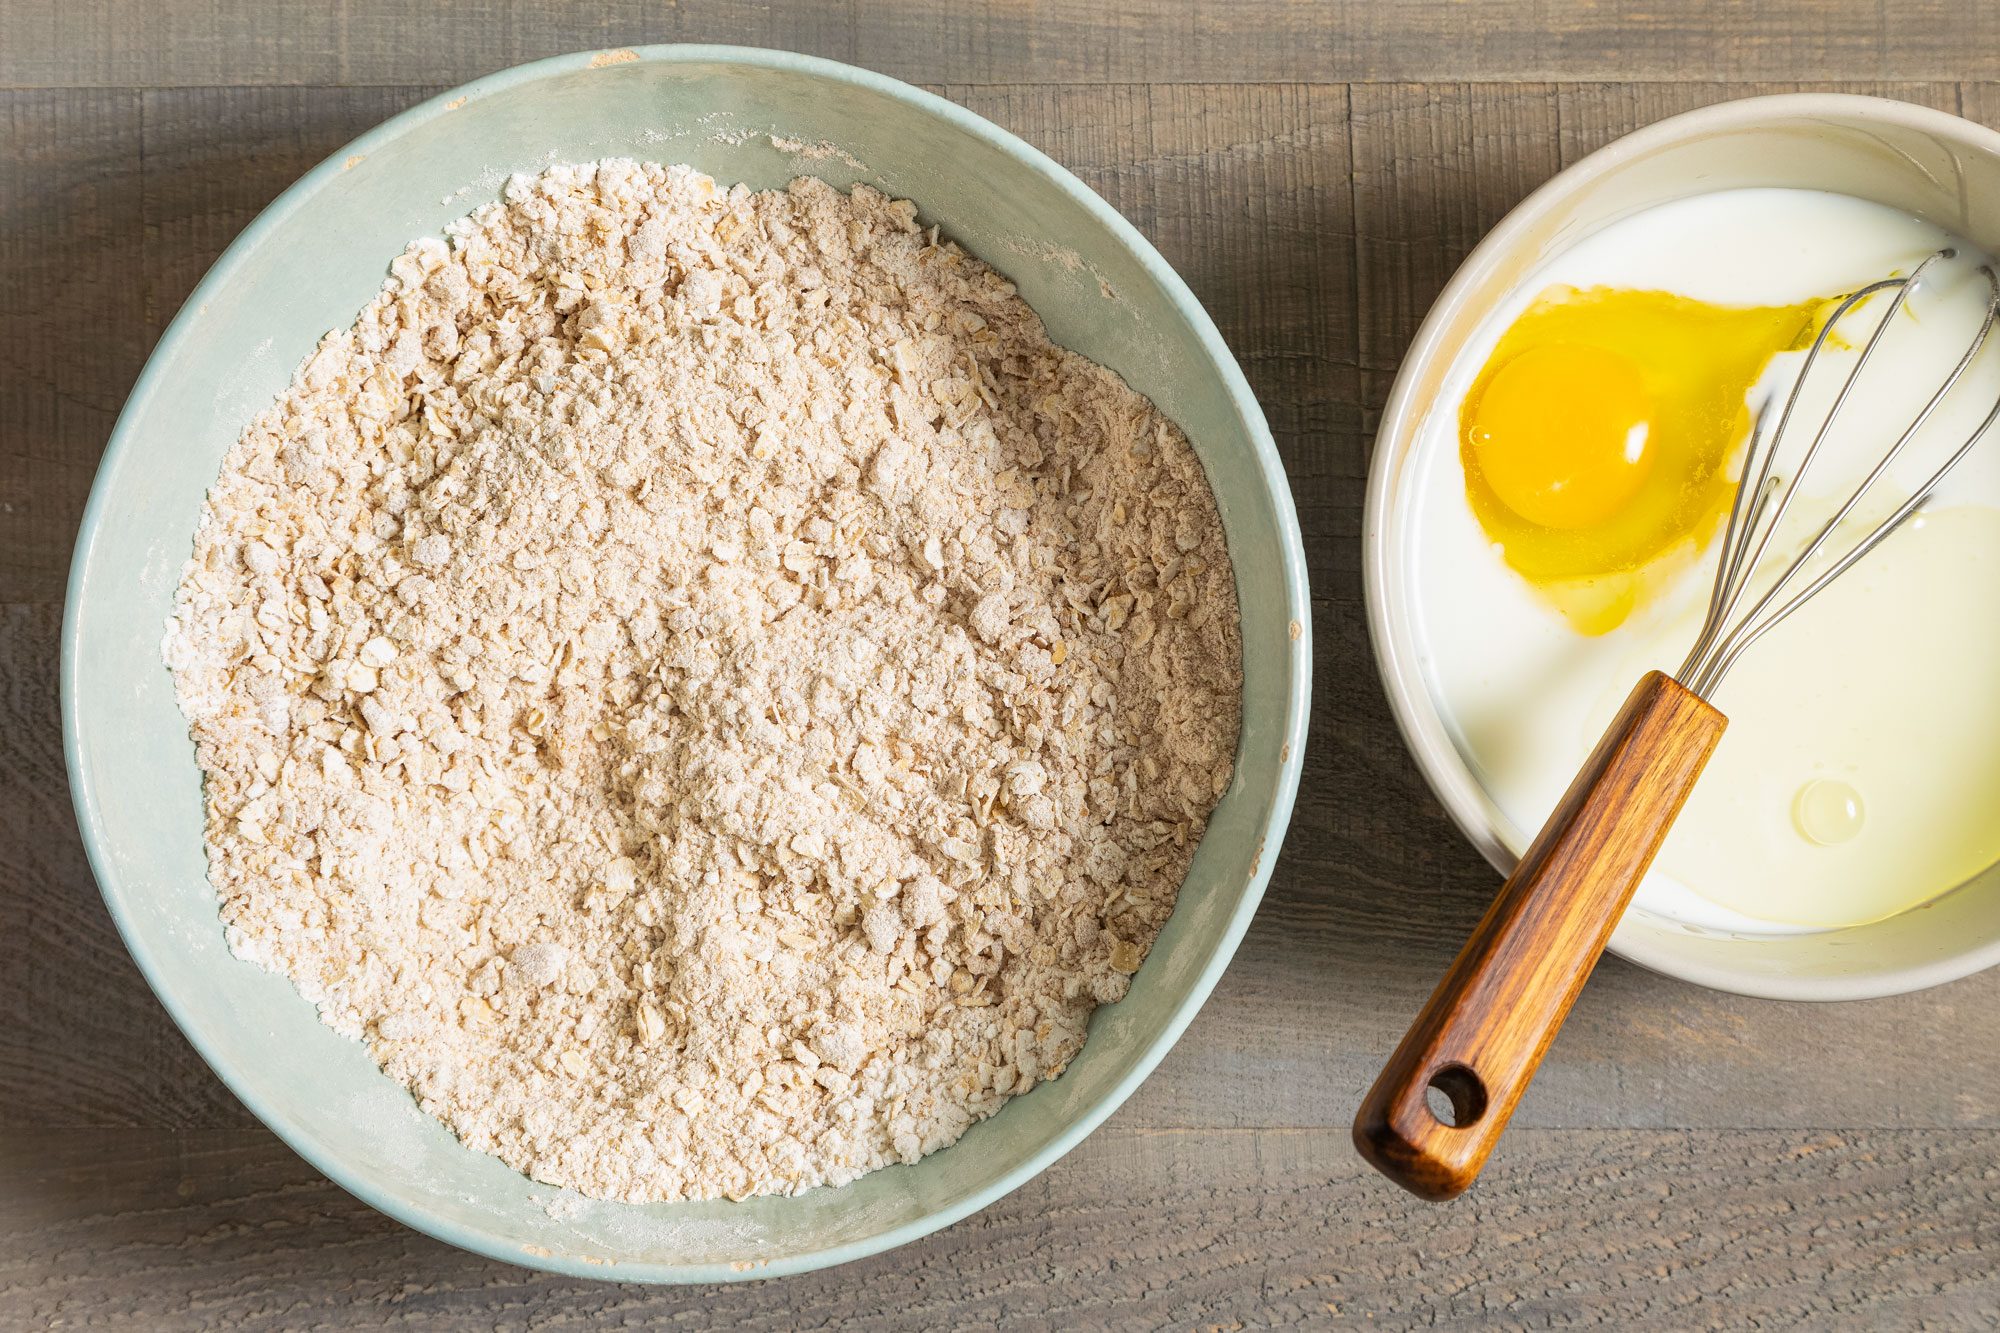 Oatmeal, Whole Wheat Flour Mix in Large Ceramic Bowl and Egg and Buttermilk in Another Bowl on Wooden Surface